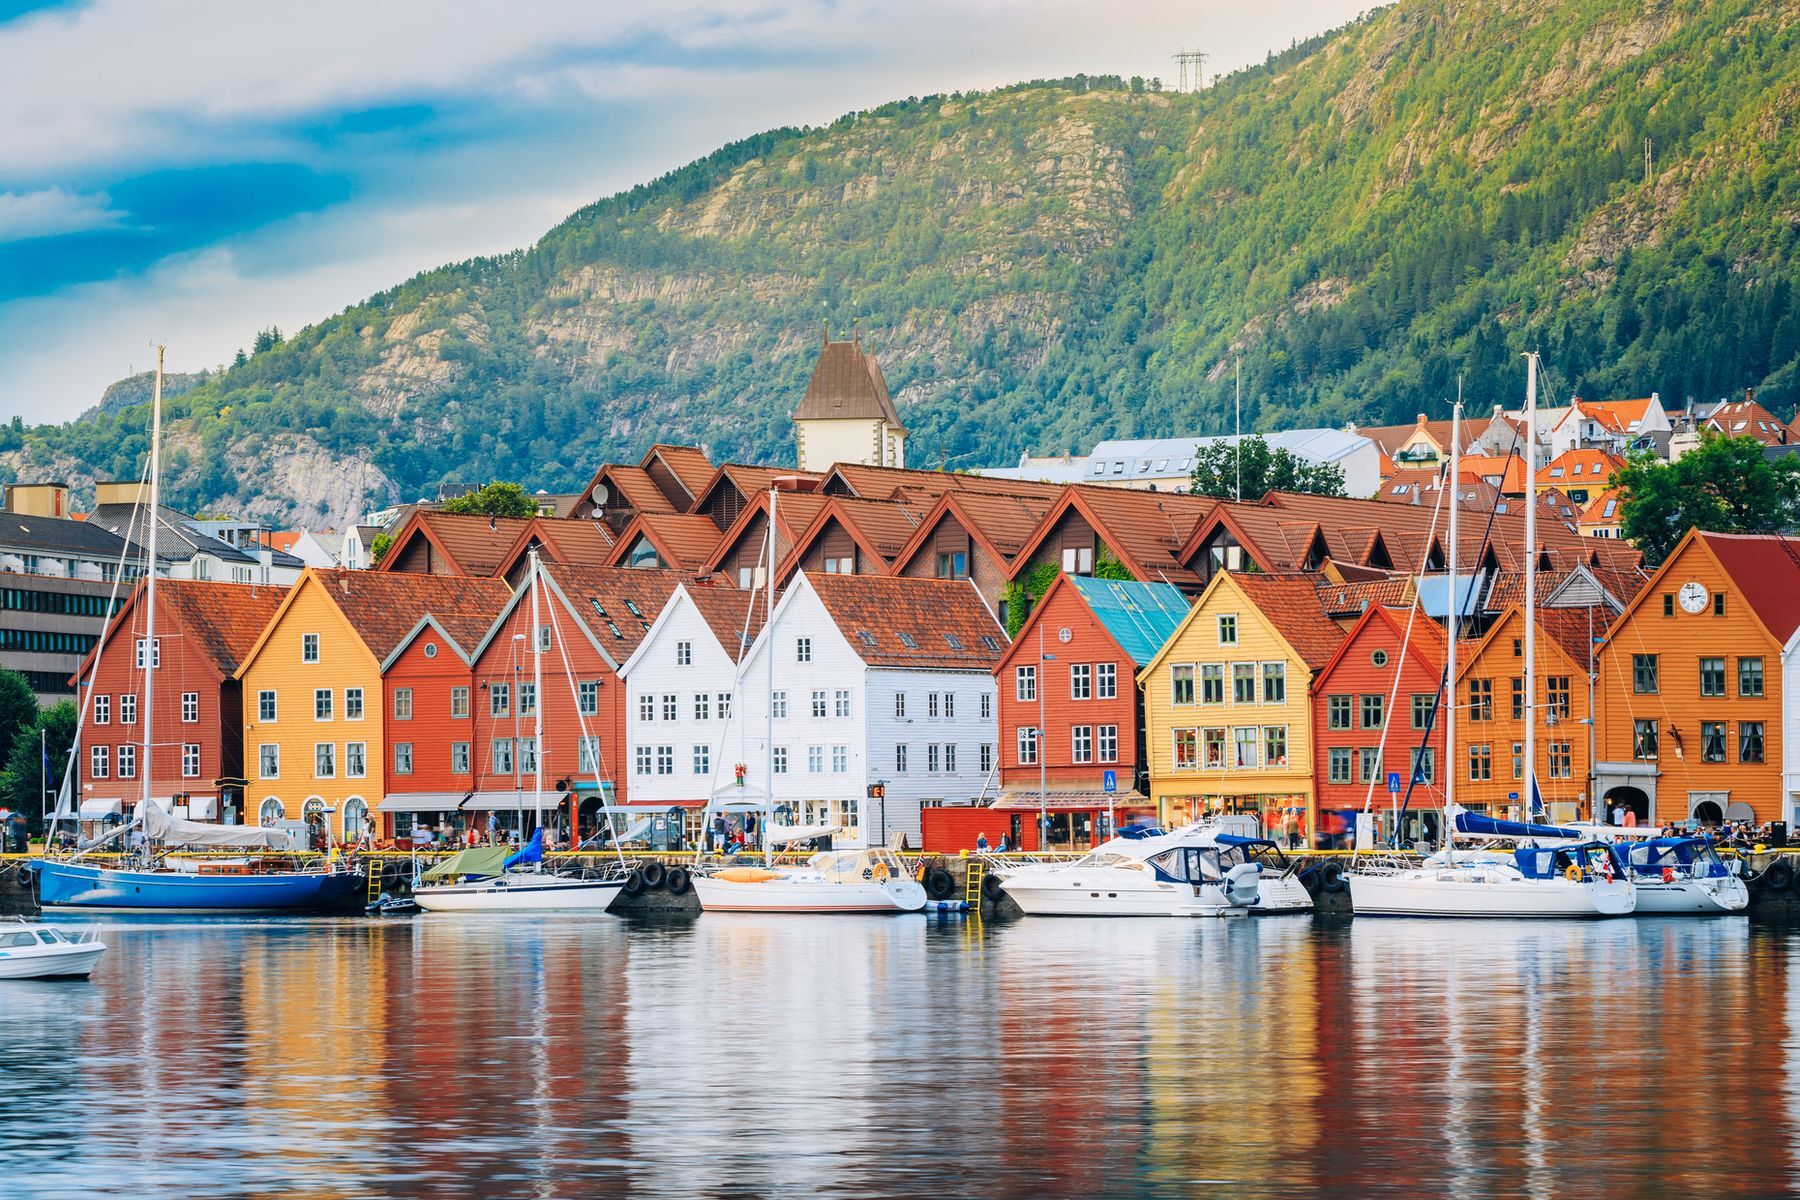 Located in southwest Norway, <a href="https://www.visitnorway.com/places-to-go/fjord-norway/bergen/?lang=usa" rel="noreferrer noopener">Bergen</a> is a picturesque town bordered by fjords and mountains. Main attractions include a historical district listed as a UNESCO World Heritage Site and the Fløyen funicular offering gorgeous panoramic views. Visitors to the country’s second-largest city should also explore its art museums and stroll along the old port to admire its colourful houses.